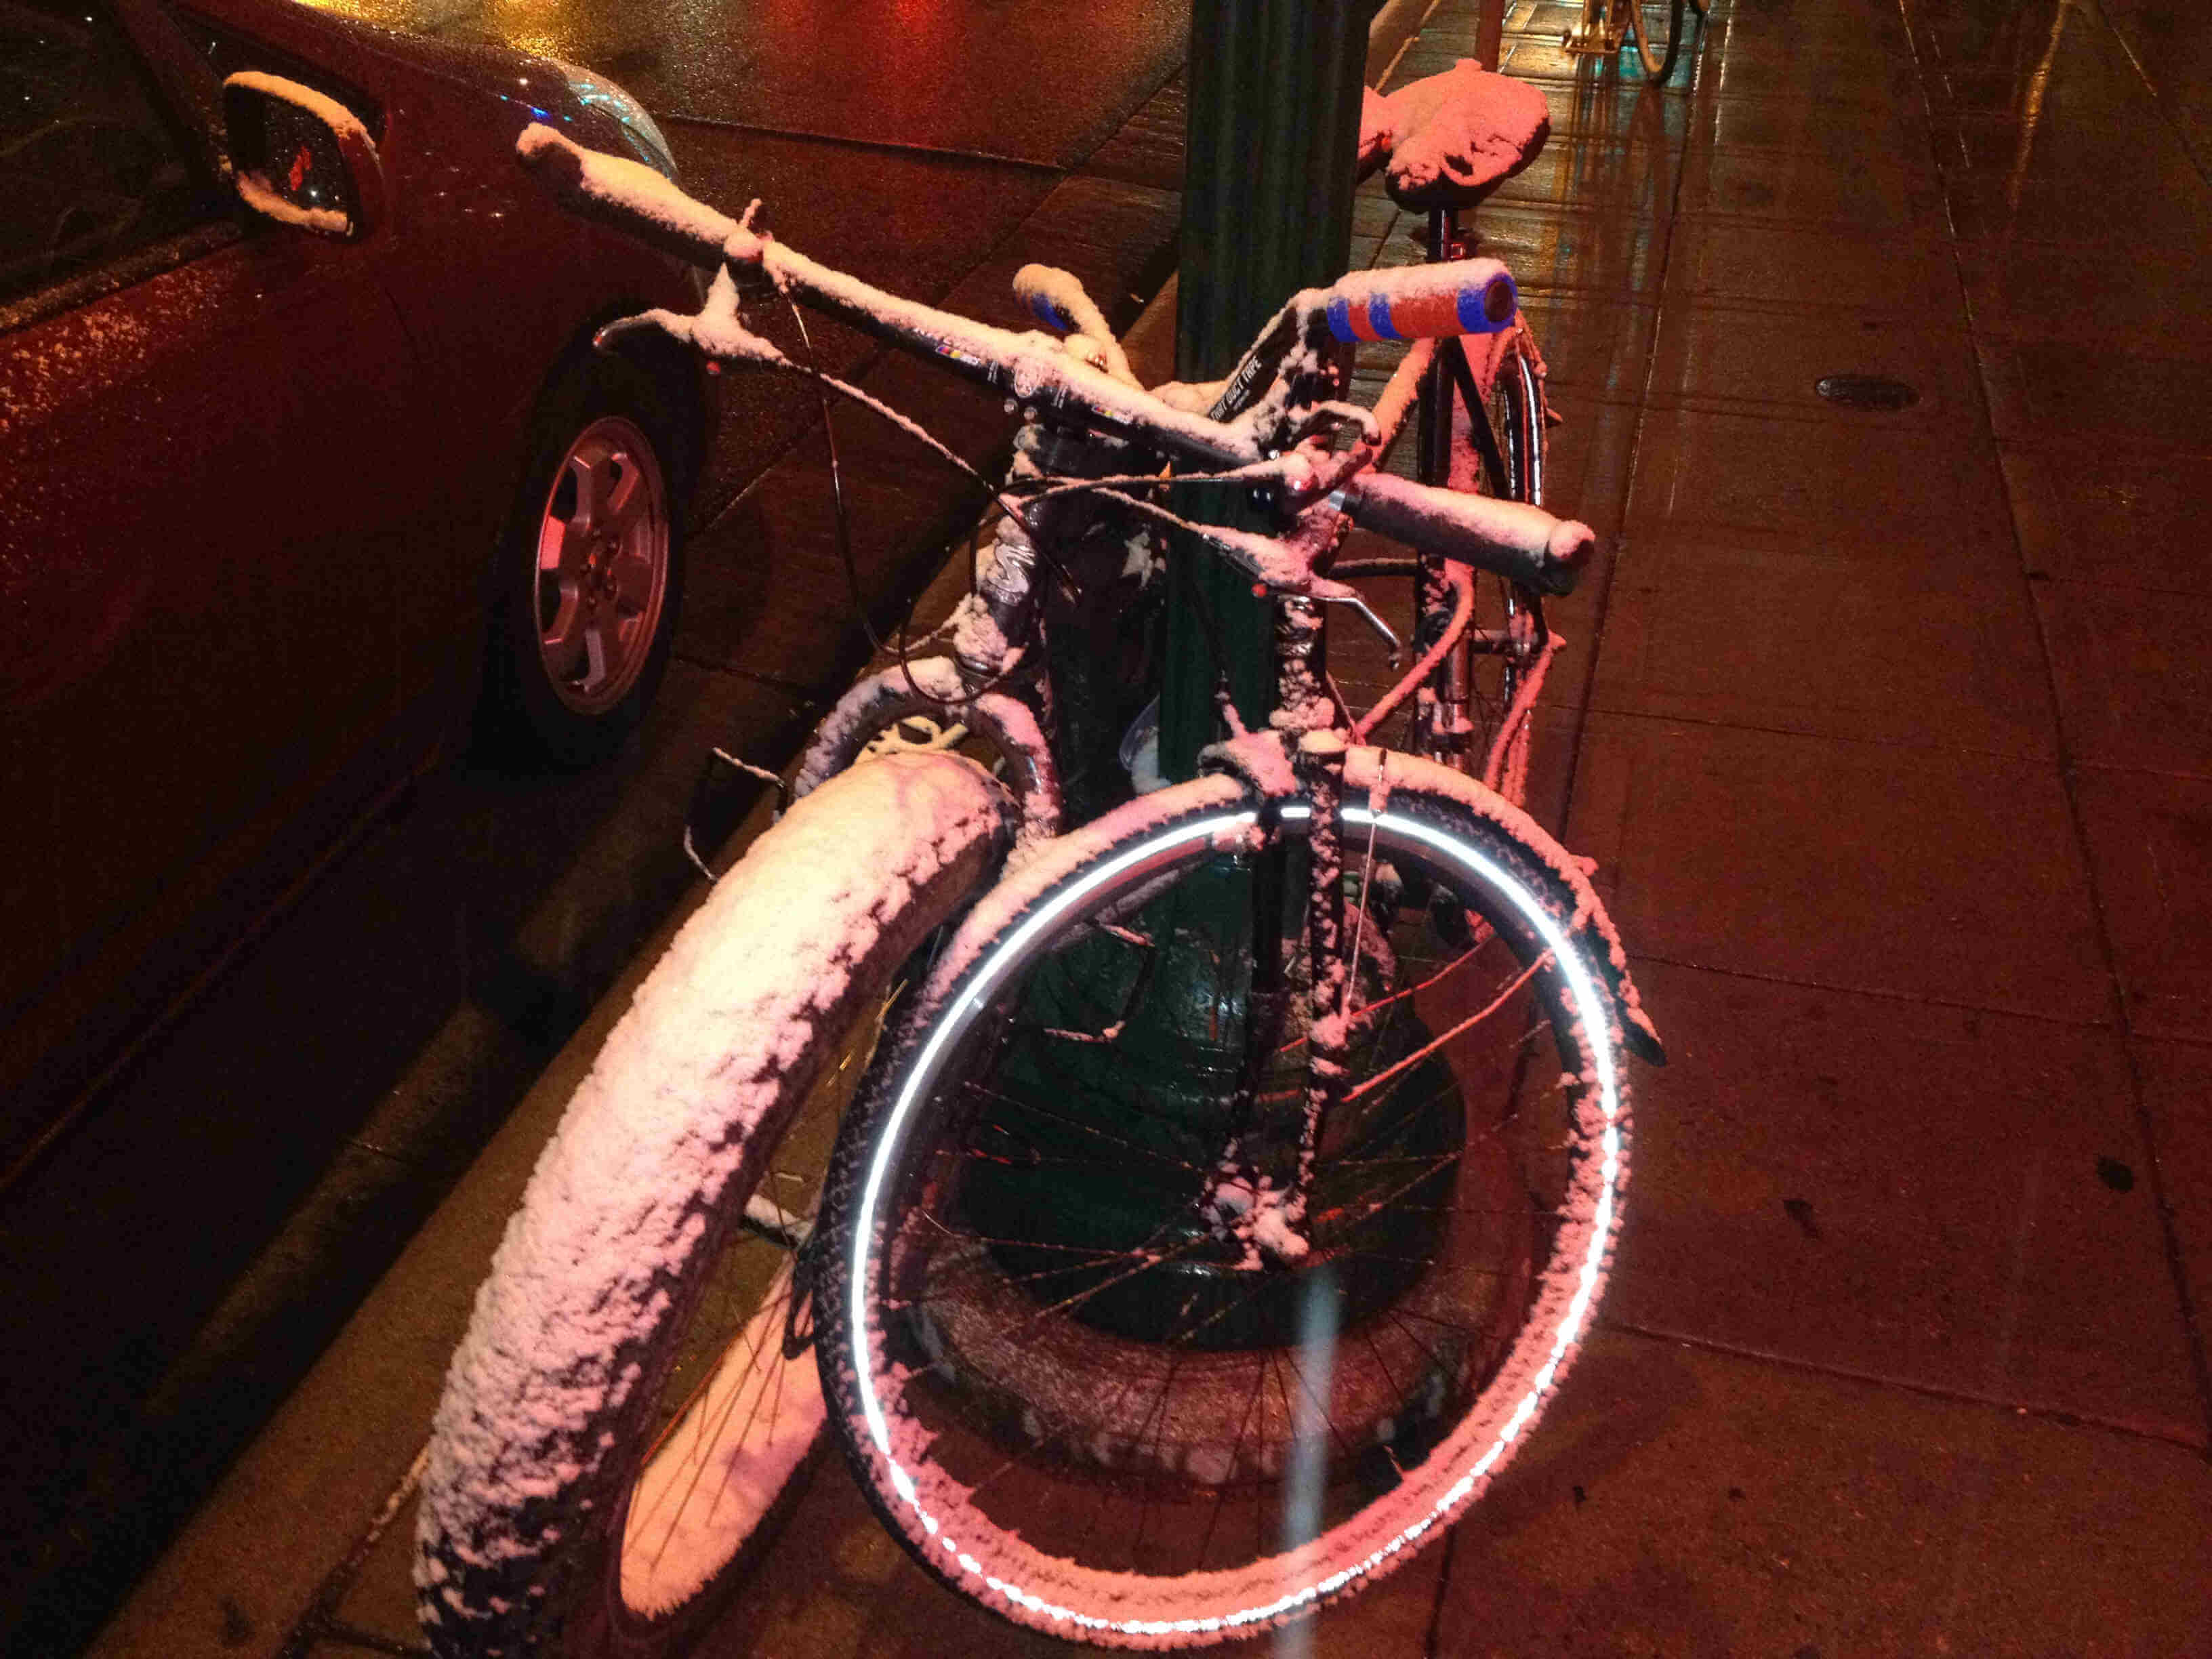 Front view of a fat bike and other bike, coated in snow,  side by side with a light pole between, on a sidewalk at night